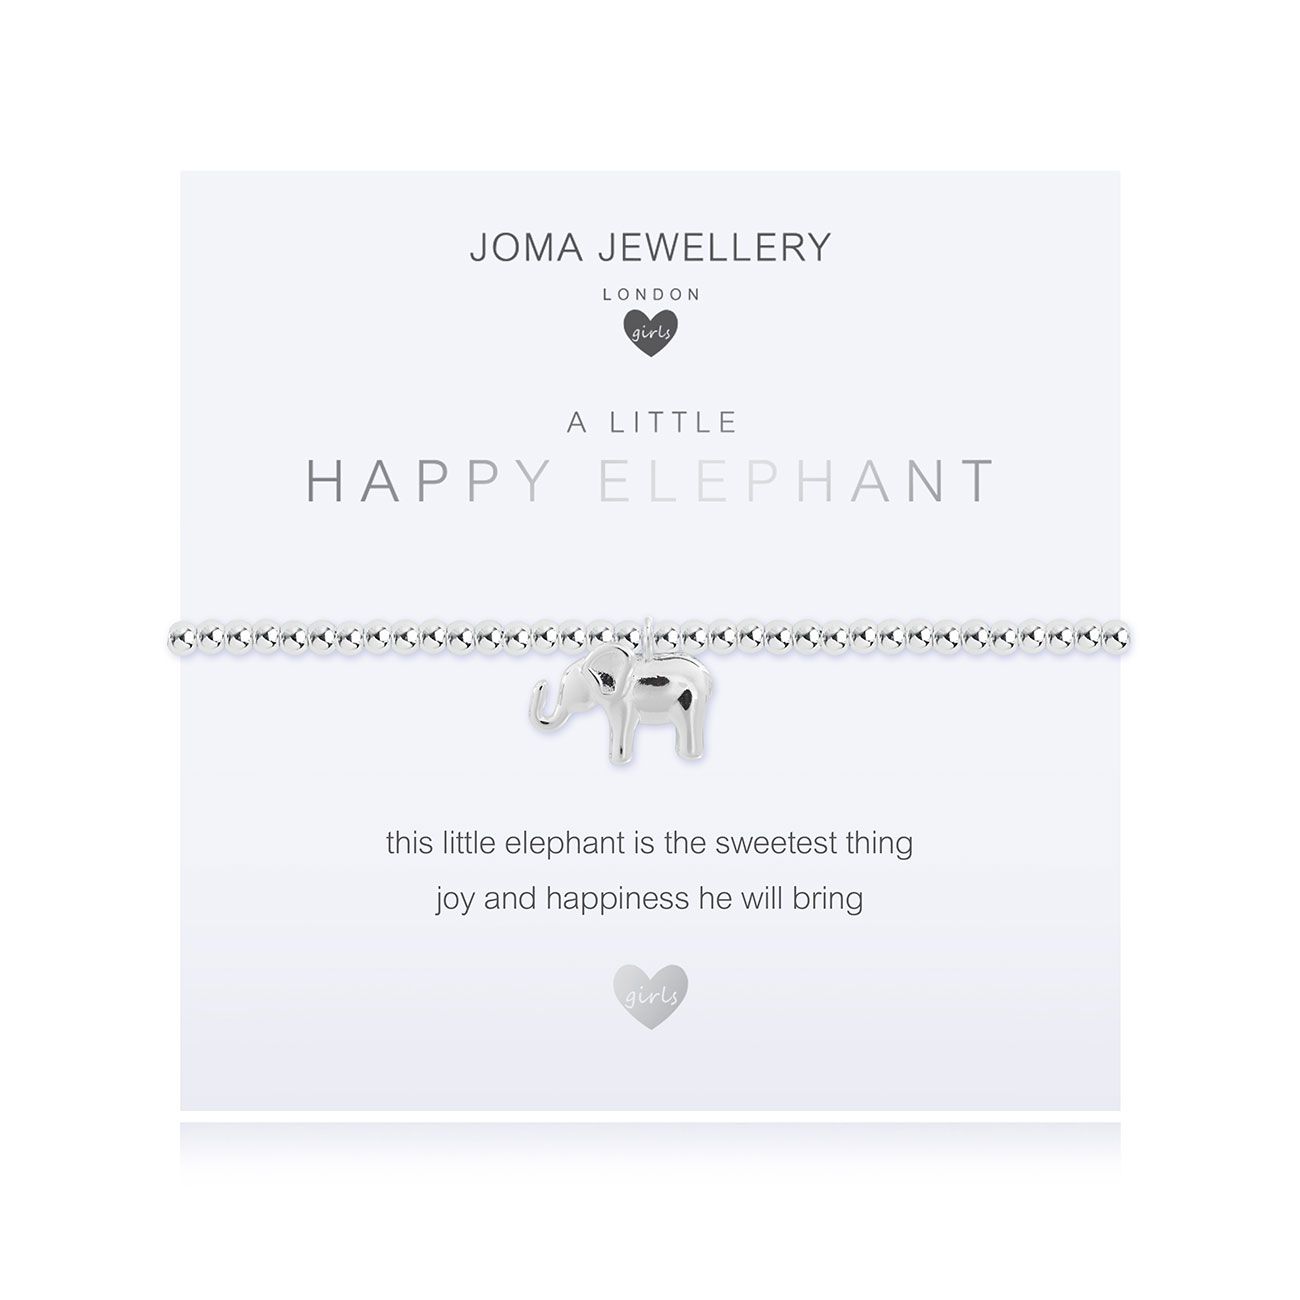 Joma Girls a little Happy Elephant Bracelet - elephant | More Than Just A Gift